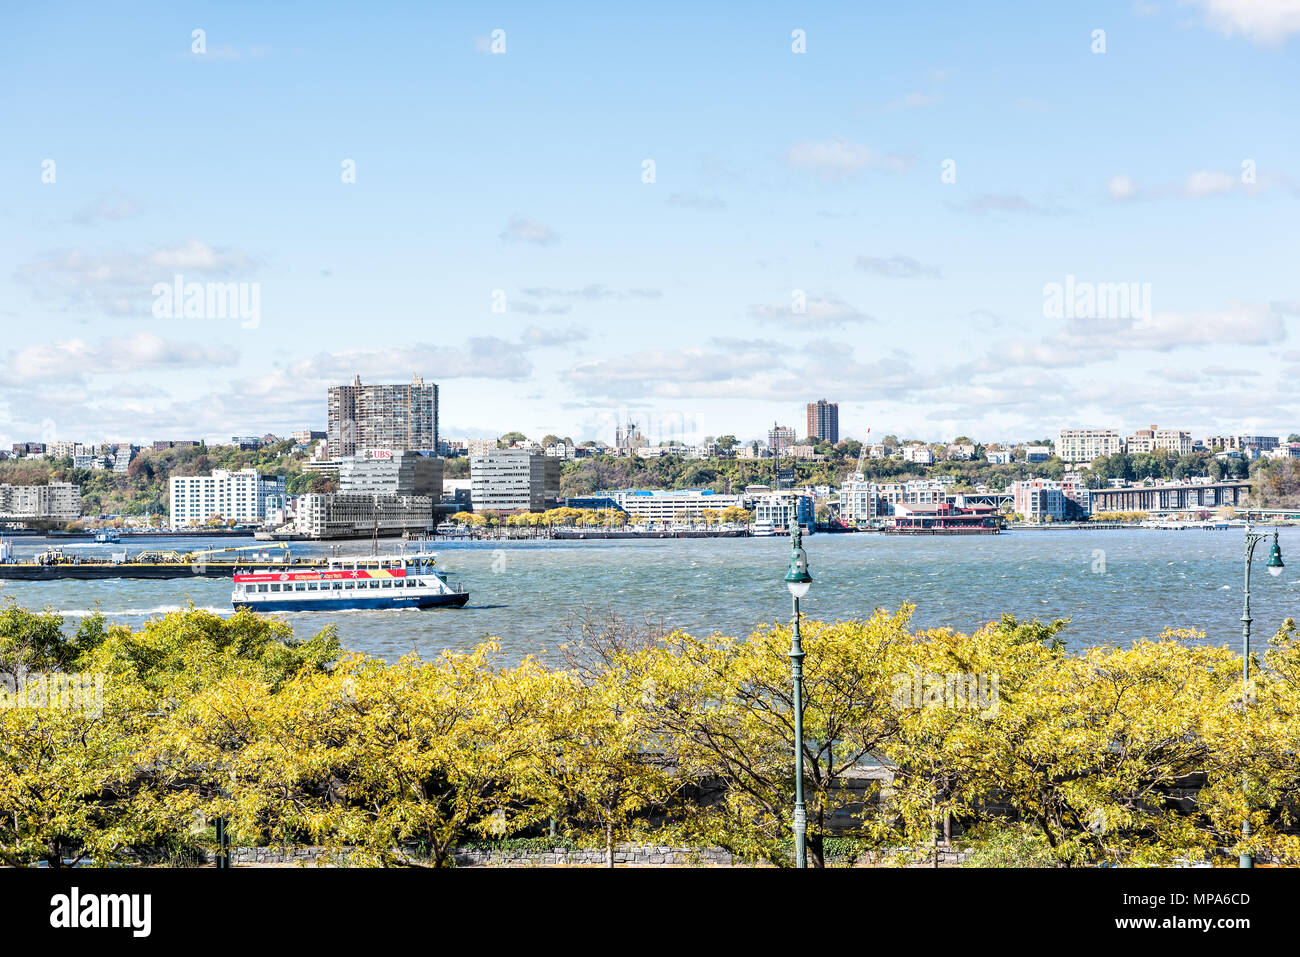 New York City, USA - October 30, 2017: View of Hudson River from highline, high line, urban in NYC with 12th avenue below, in Chelsea West Side by Hud Stock Photo